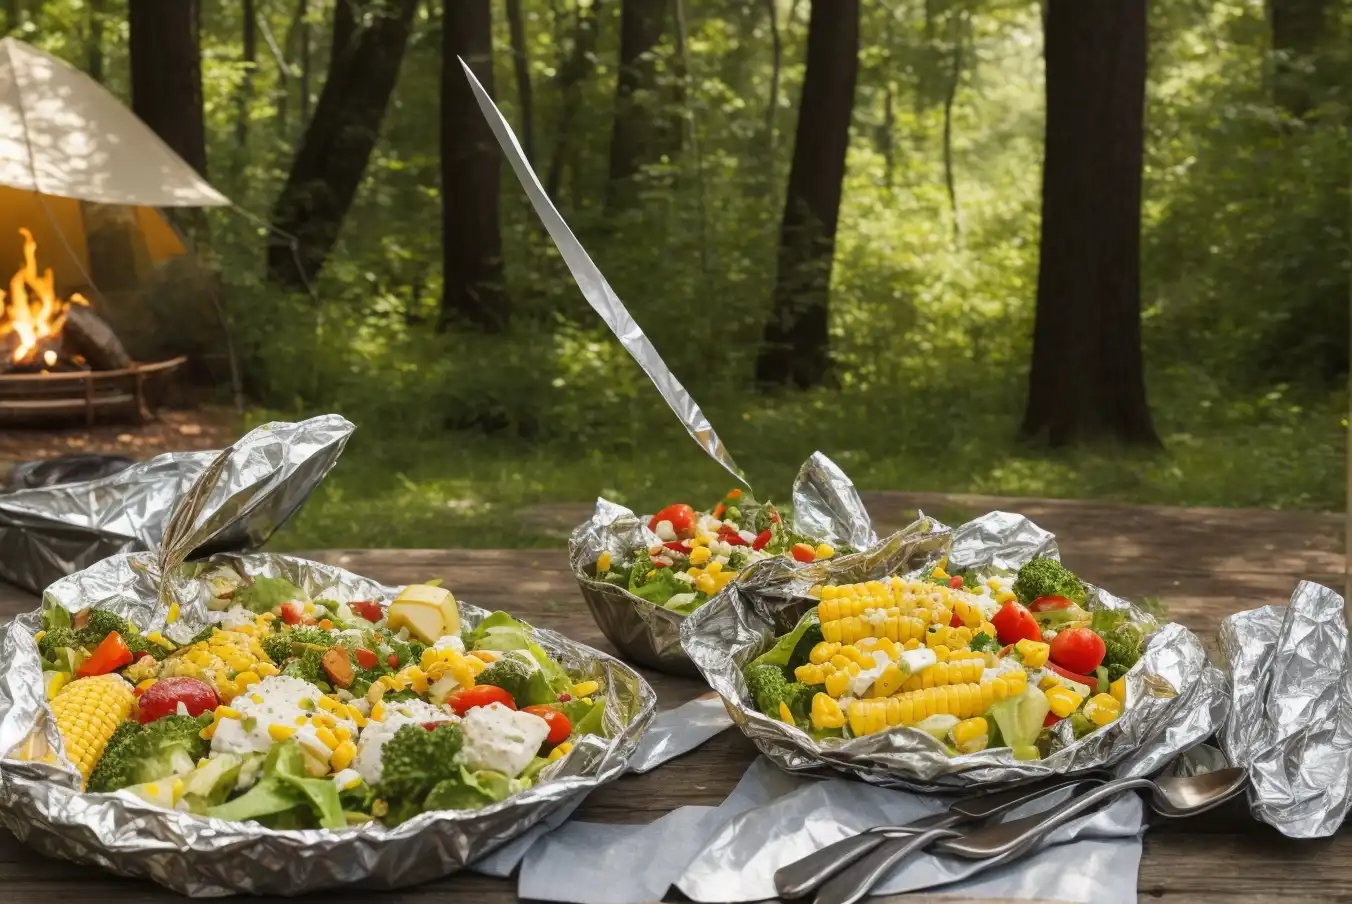 Sides and Salads in Foil Packets